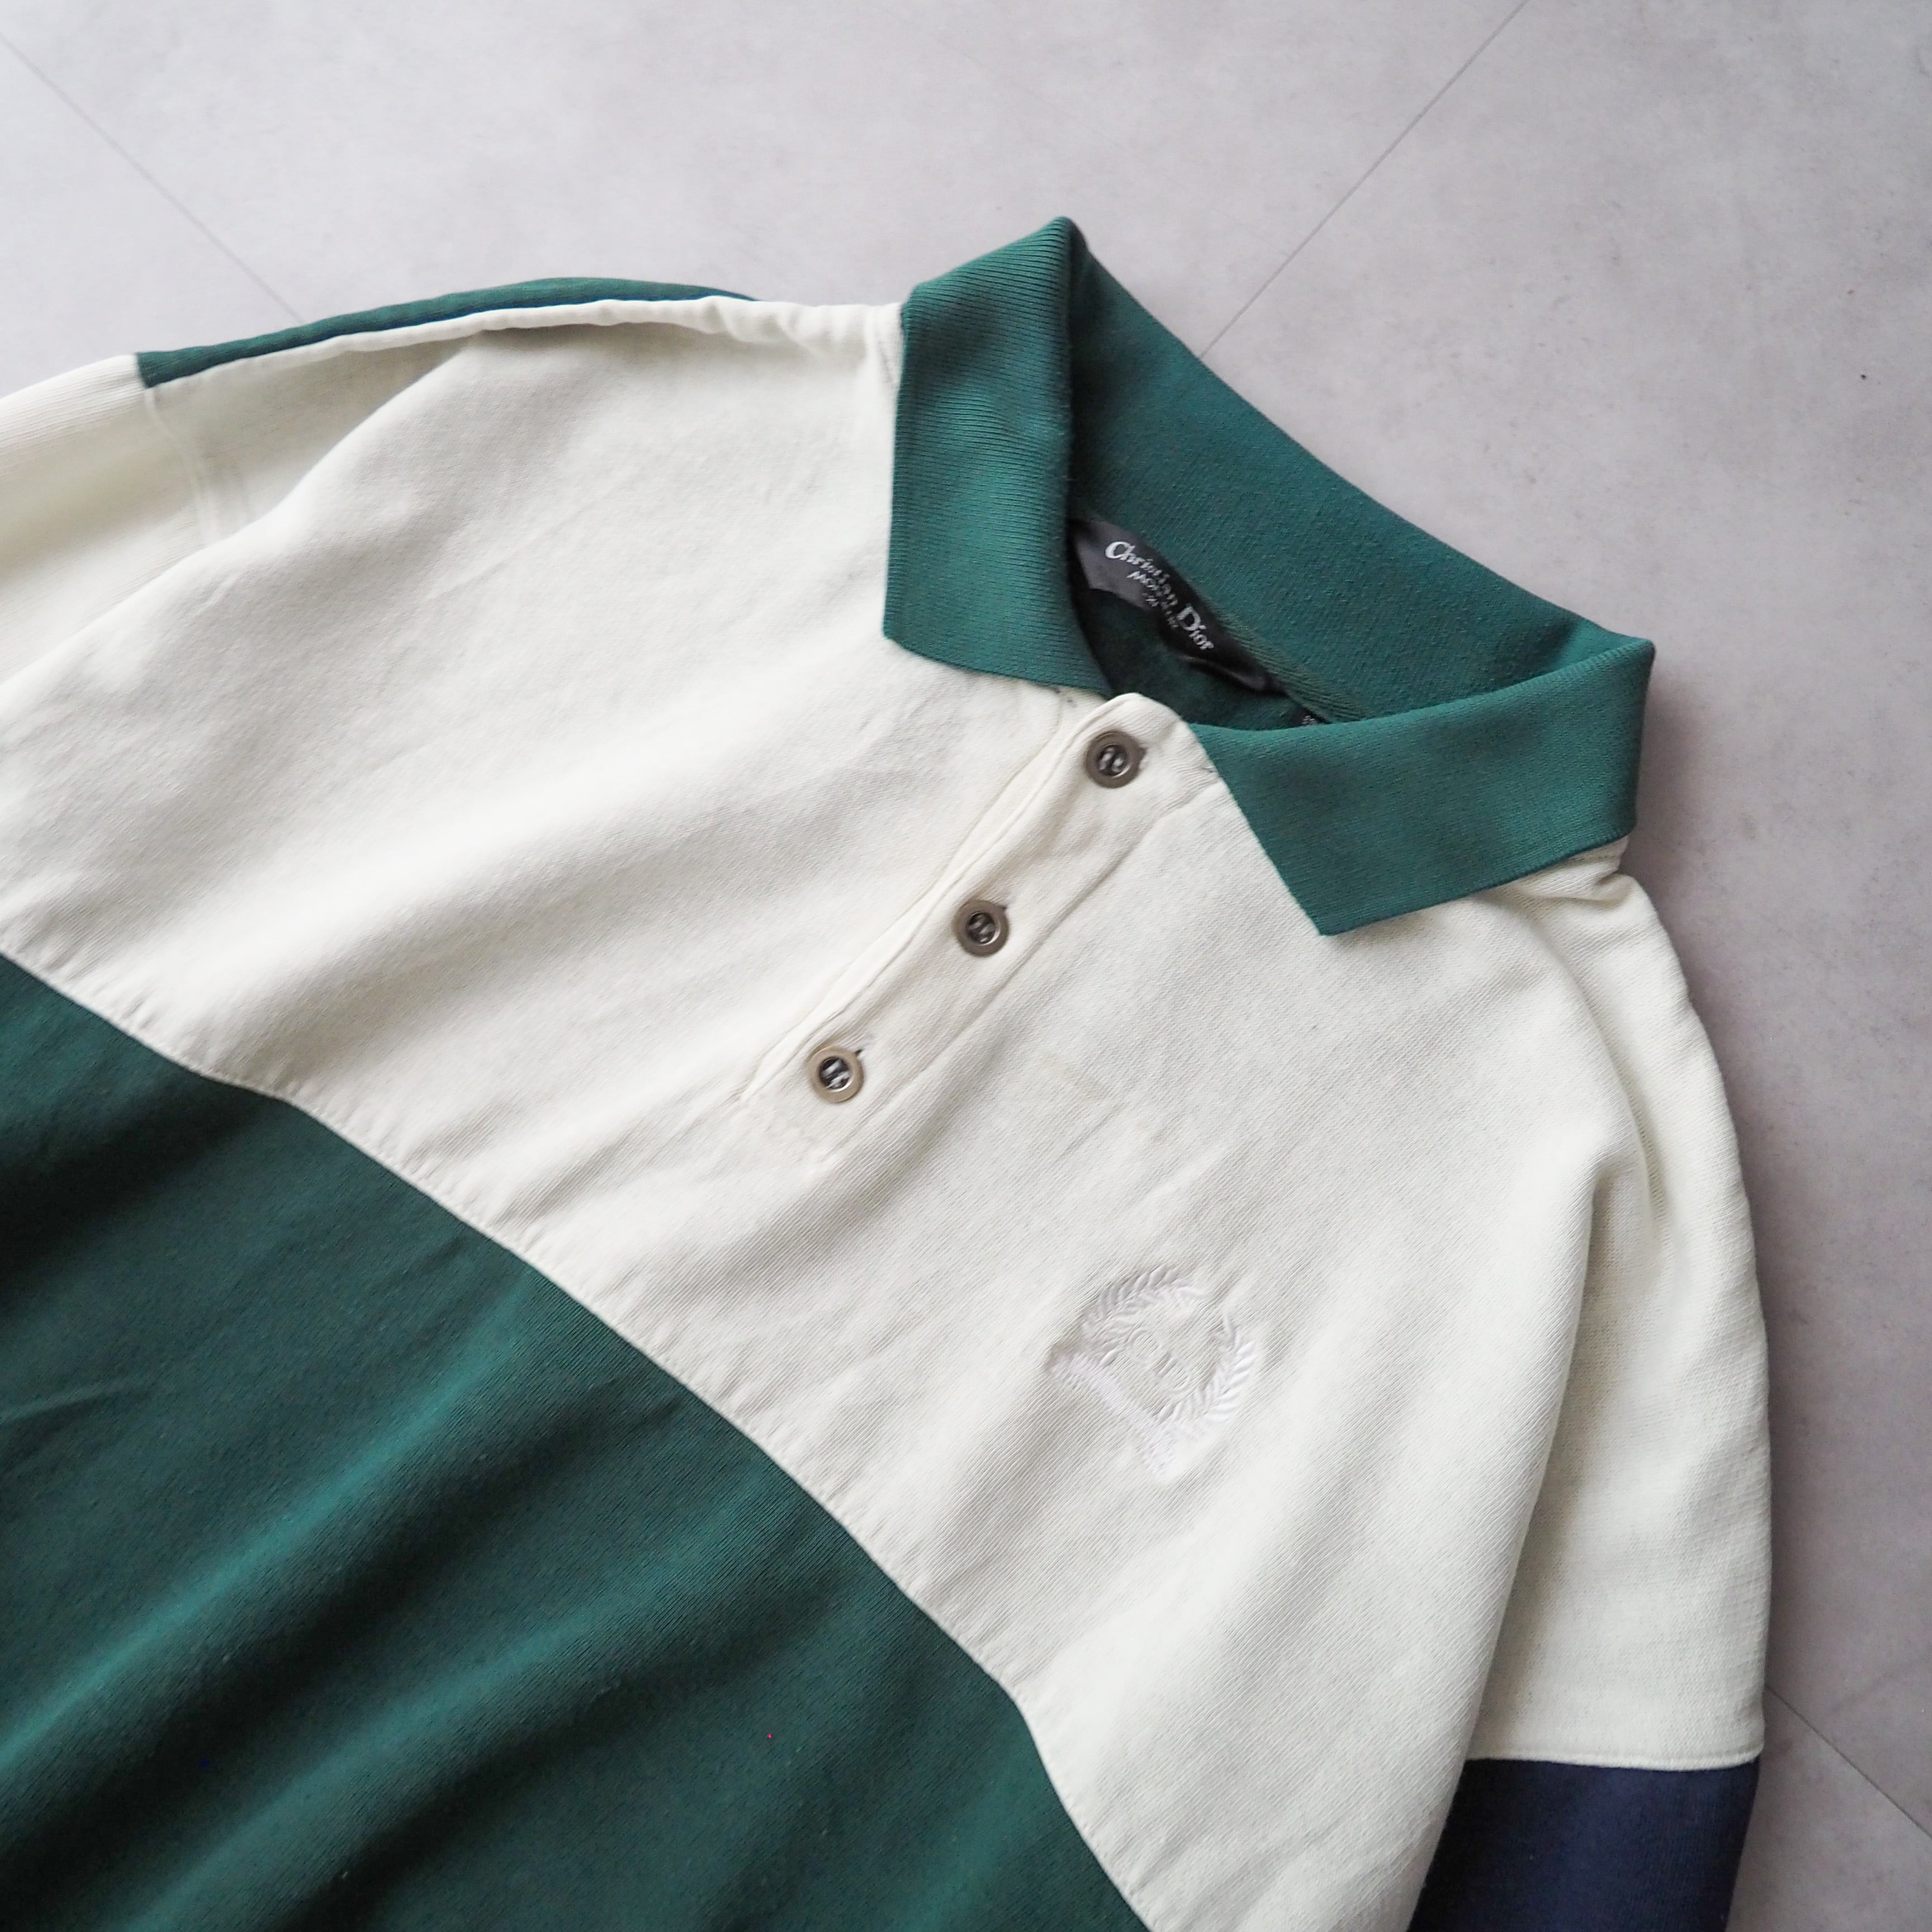 90s “Christian Dior” mulch color swithing pull-over shirt 90年代